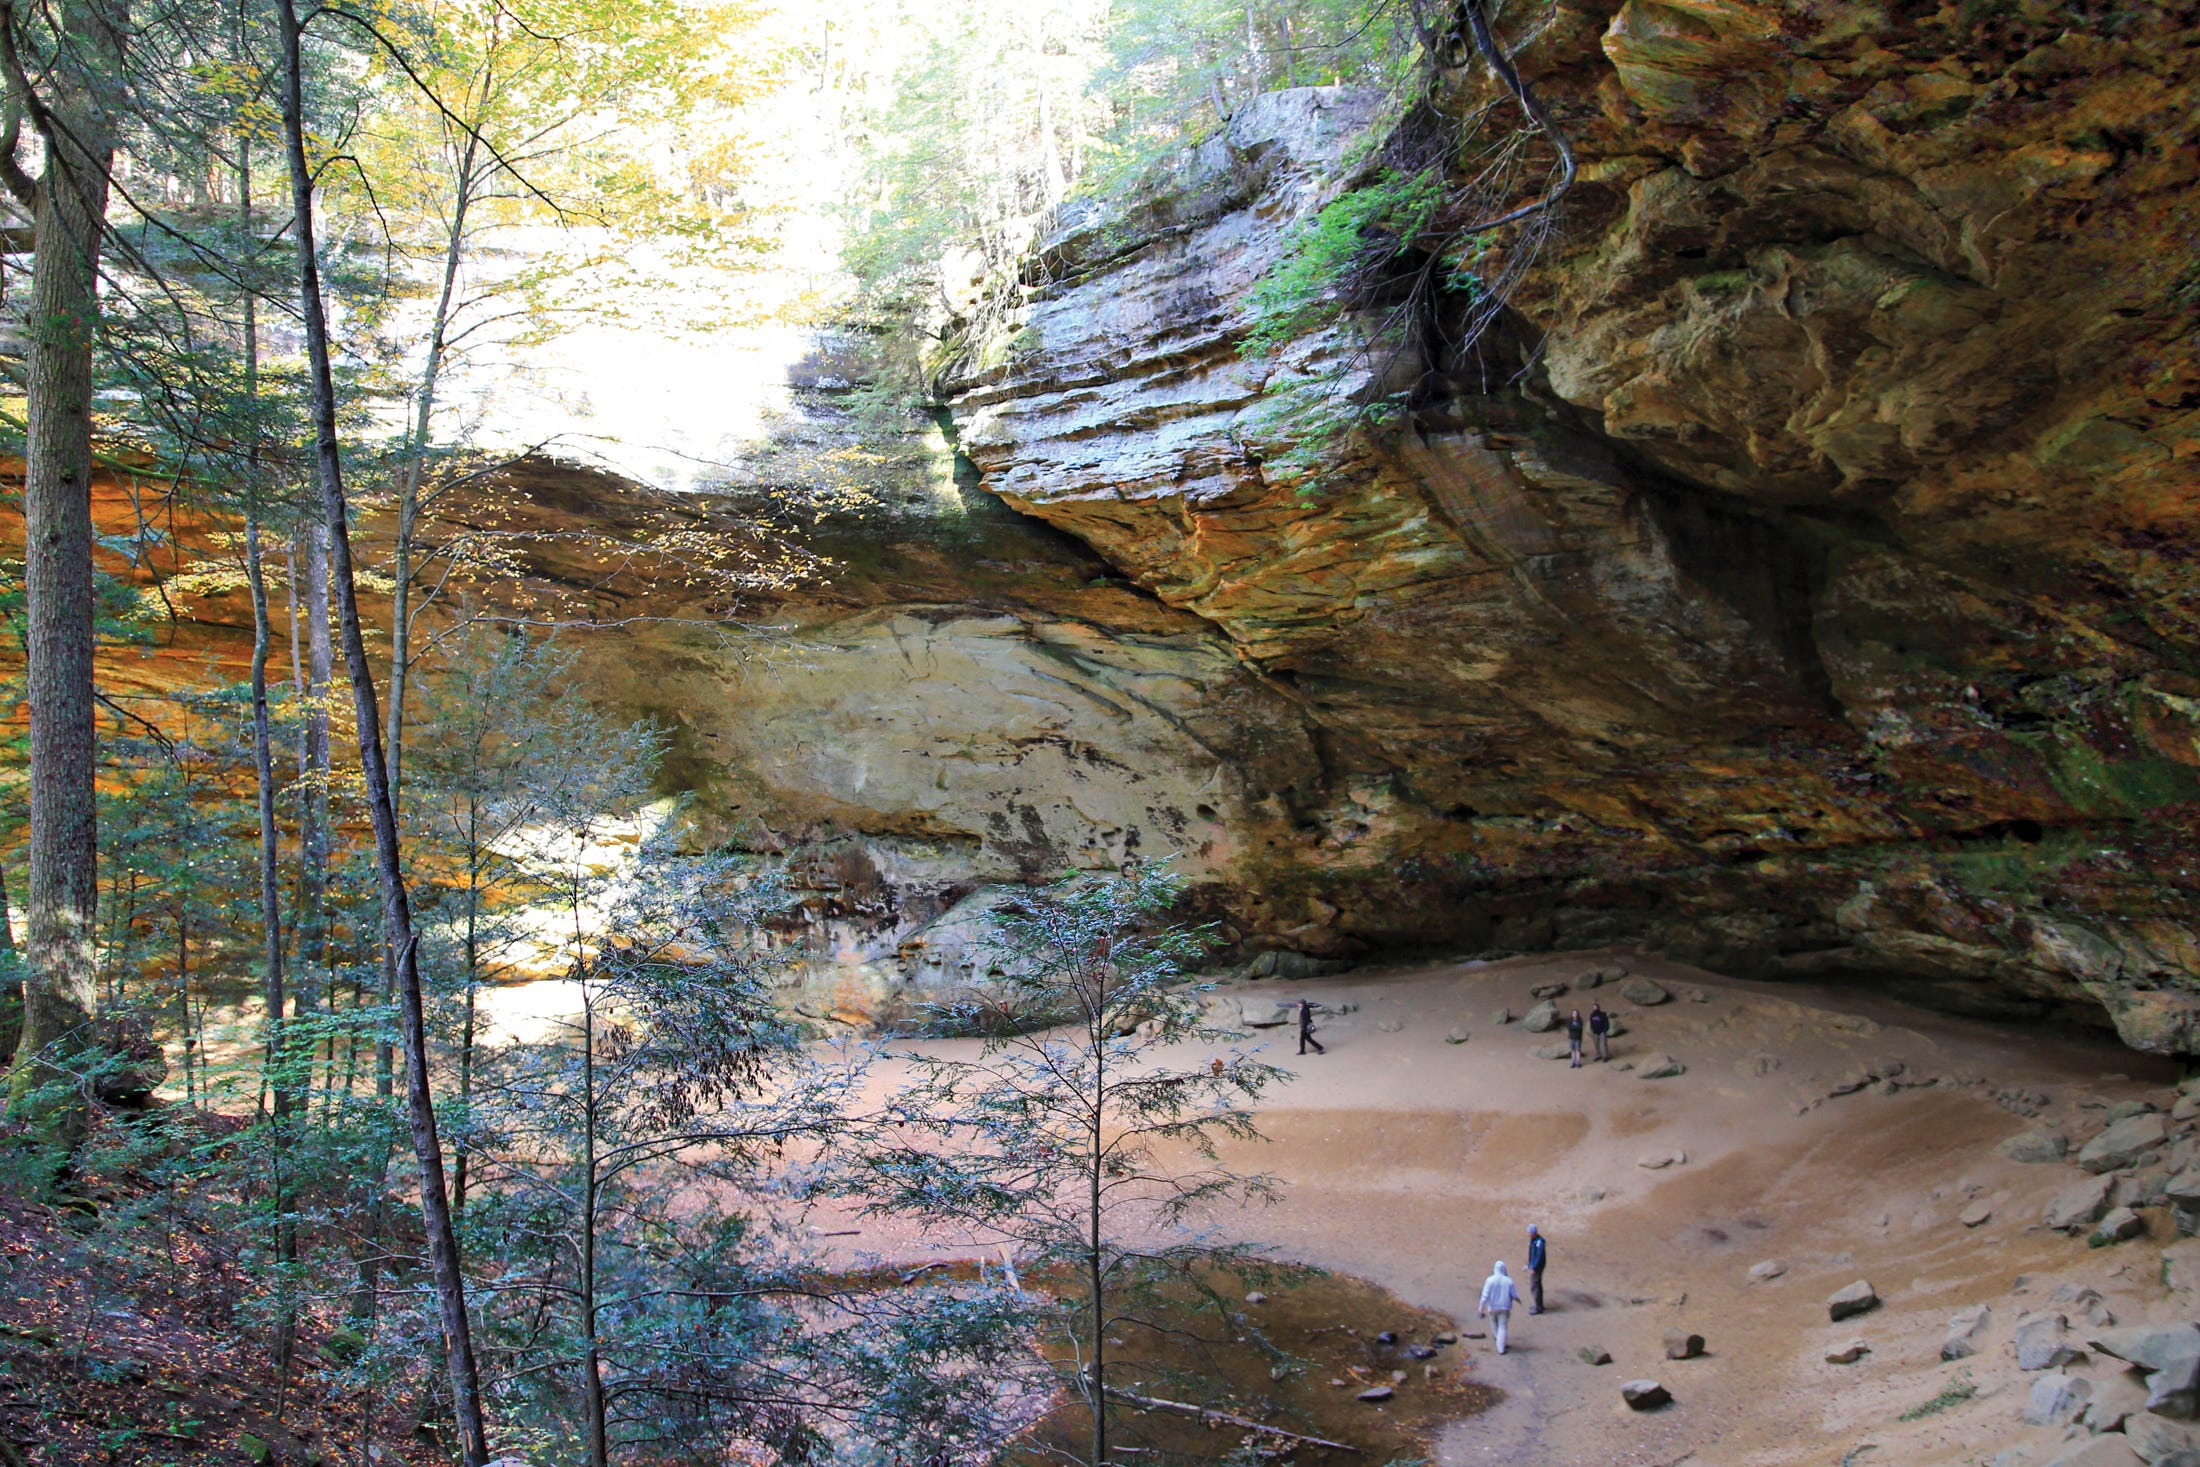 Ash Cave in Hocking Hills State Park